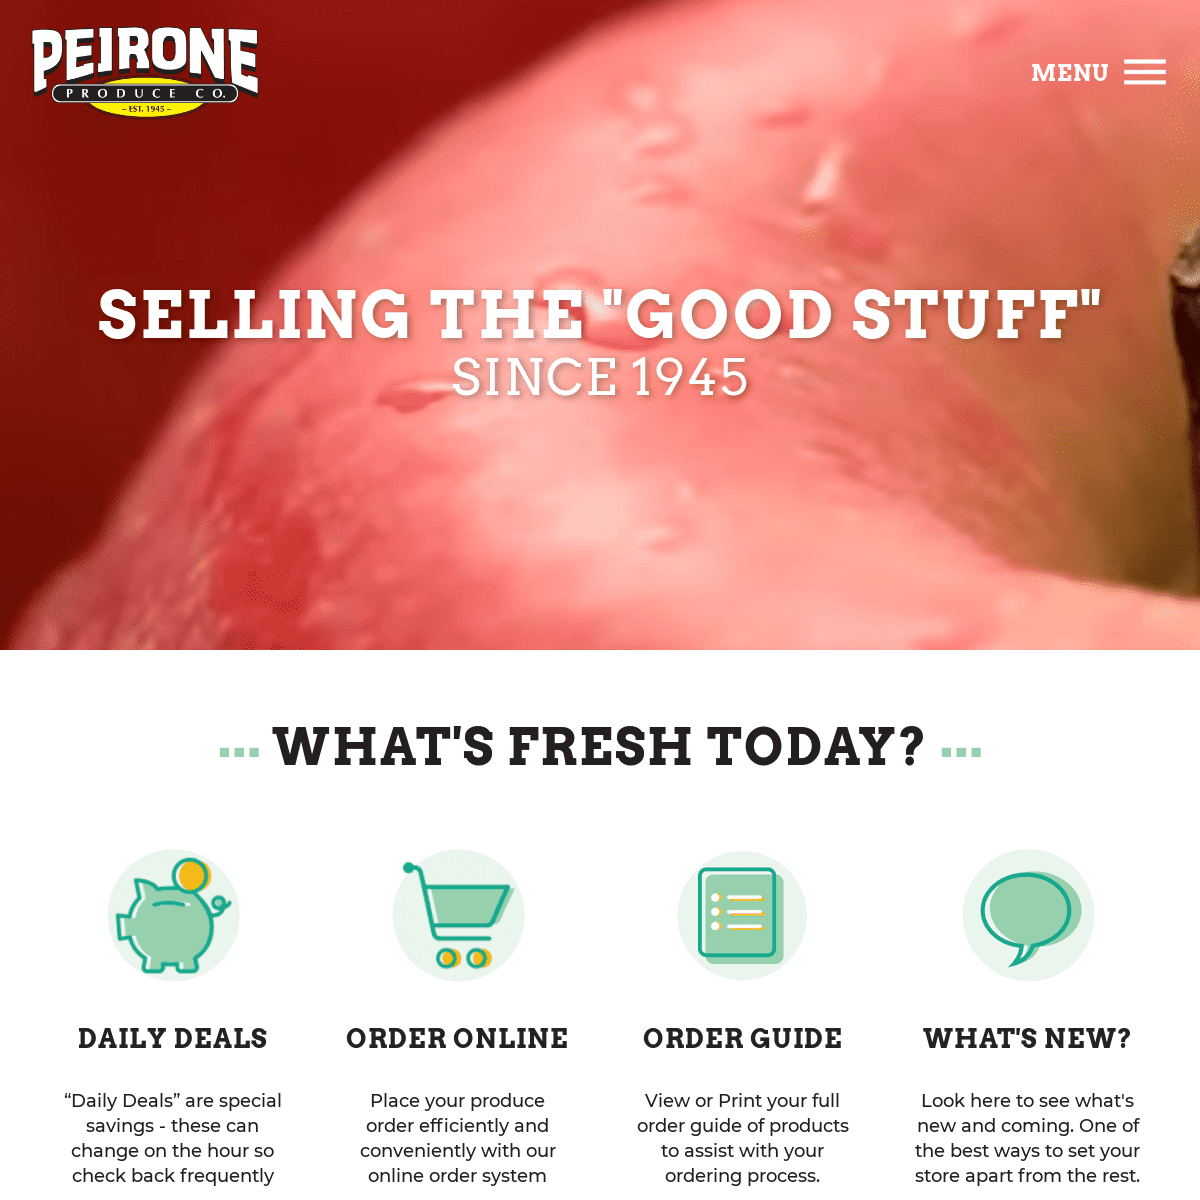 A complete backup of peironeproduce.com